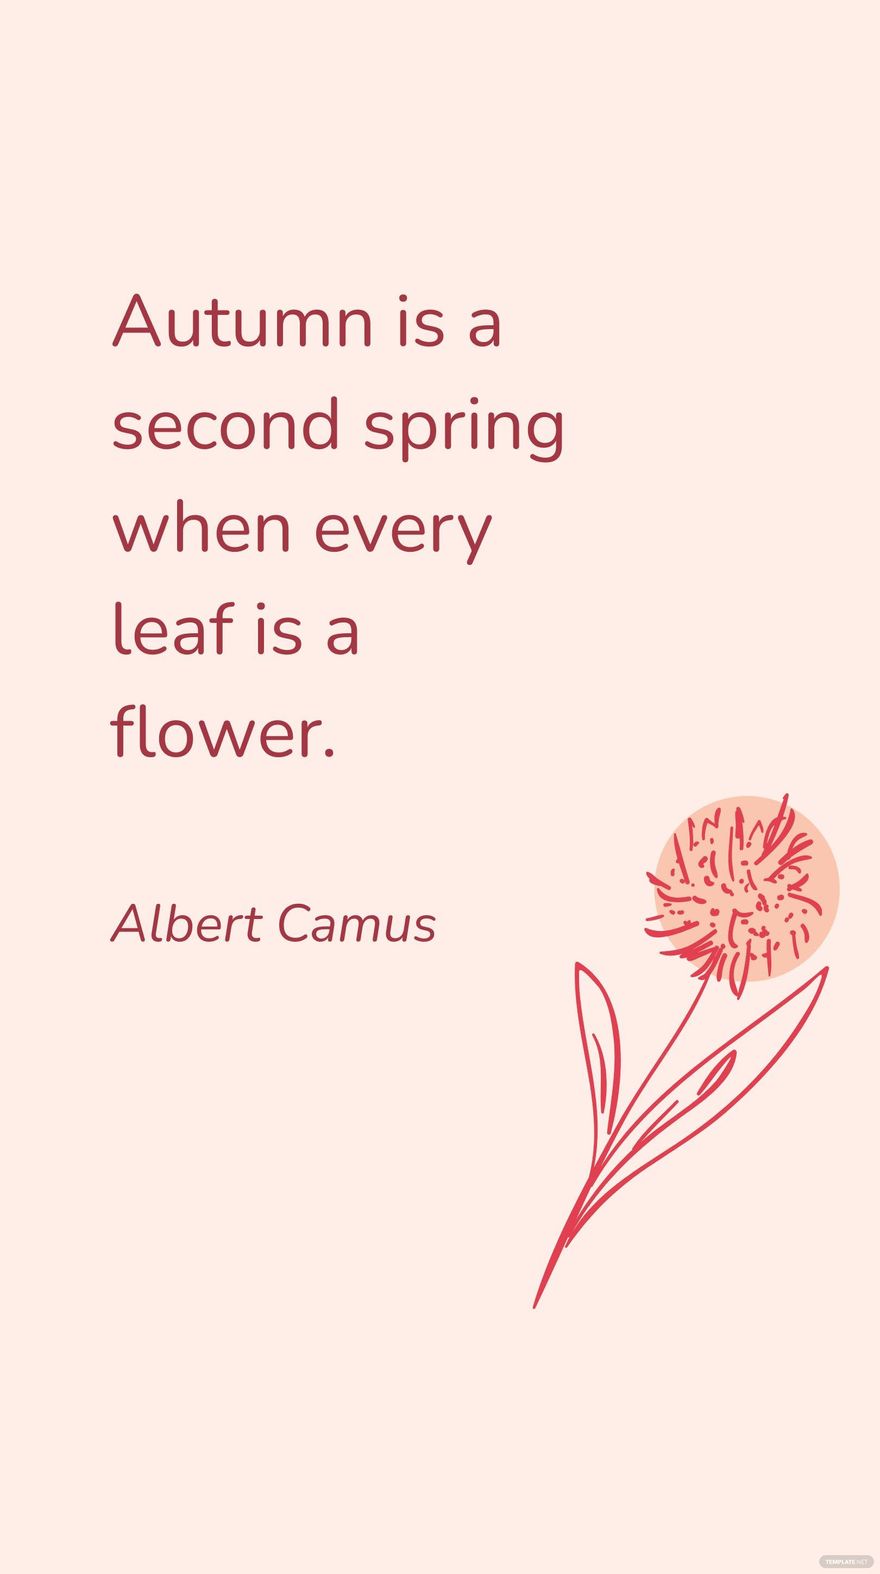 Albert Camus - Autumn is a second spring when every leaf is a flower ...